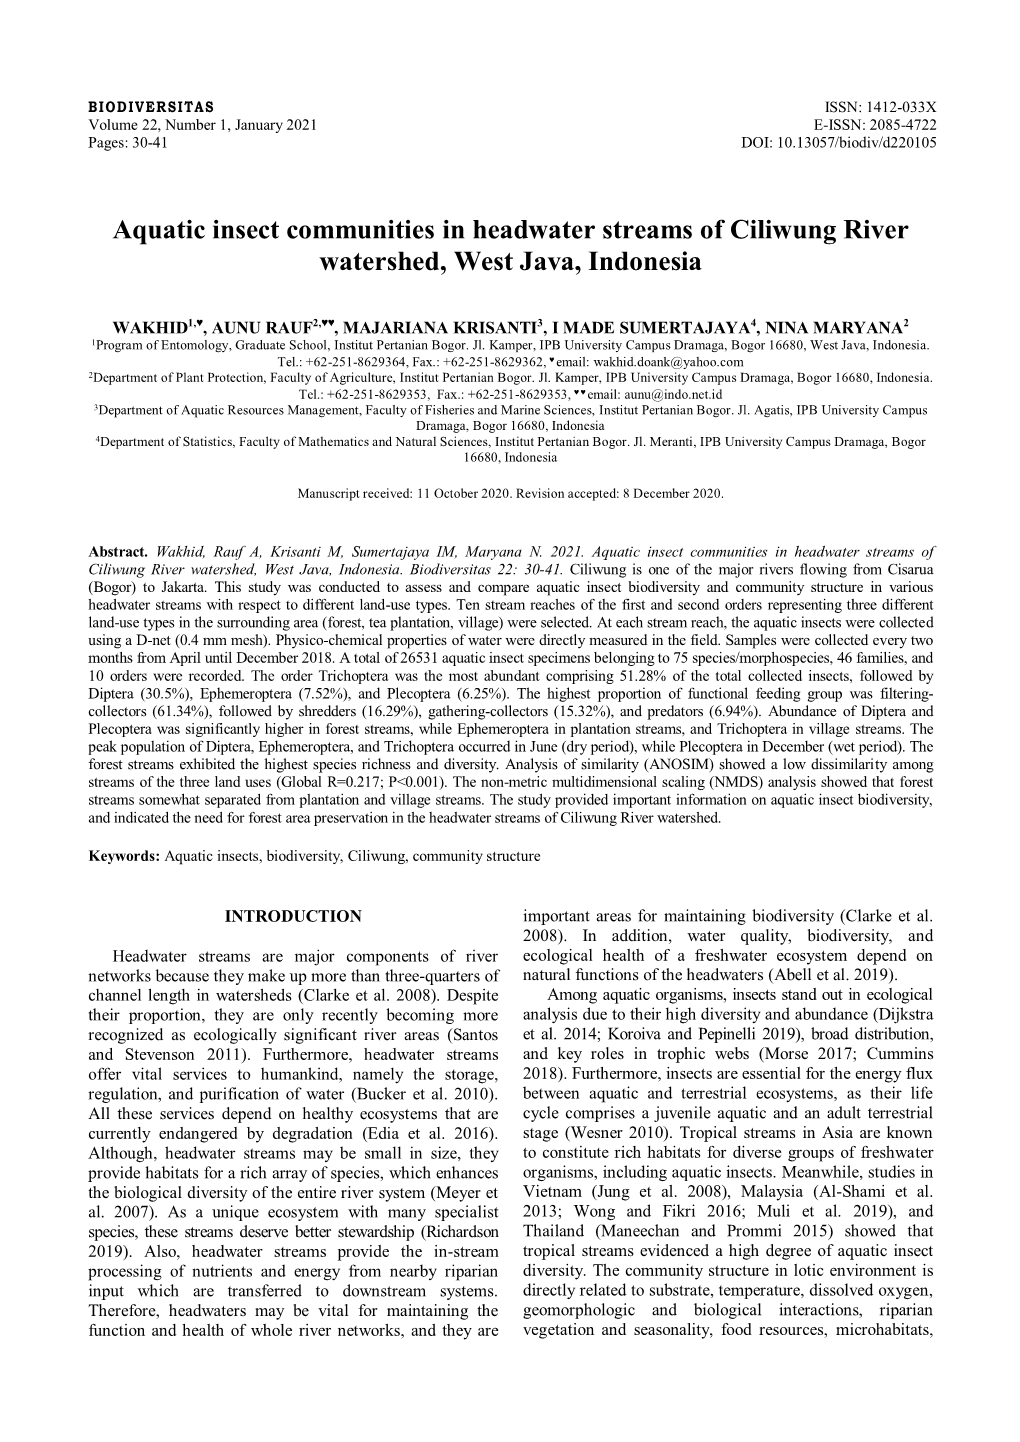 Aquatic Insect Communities in Headwater Streams of Ciliwung River Watershed, West Java, Indonesia